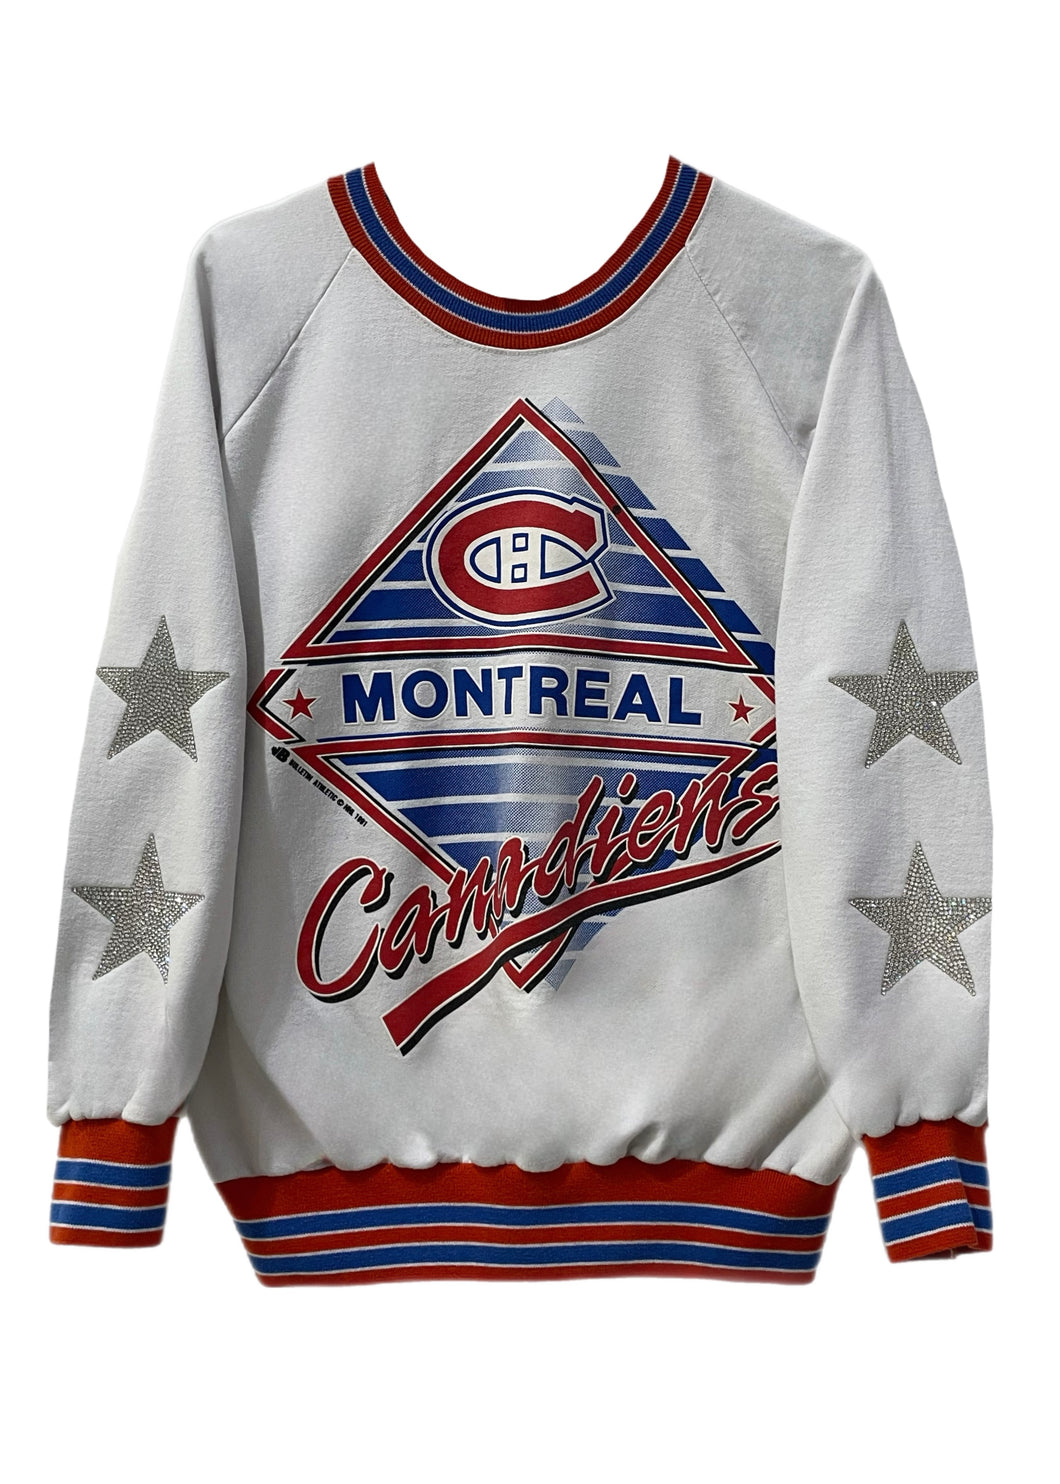 Montreal Canadiens, NHL One of a KIND Vintage Sweatshirt with Crystal Star Design